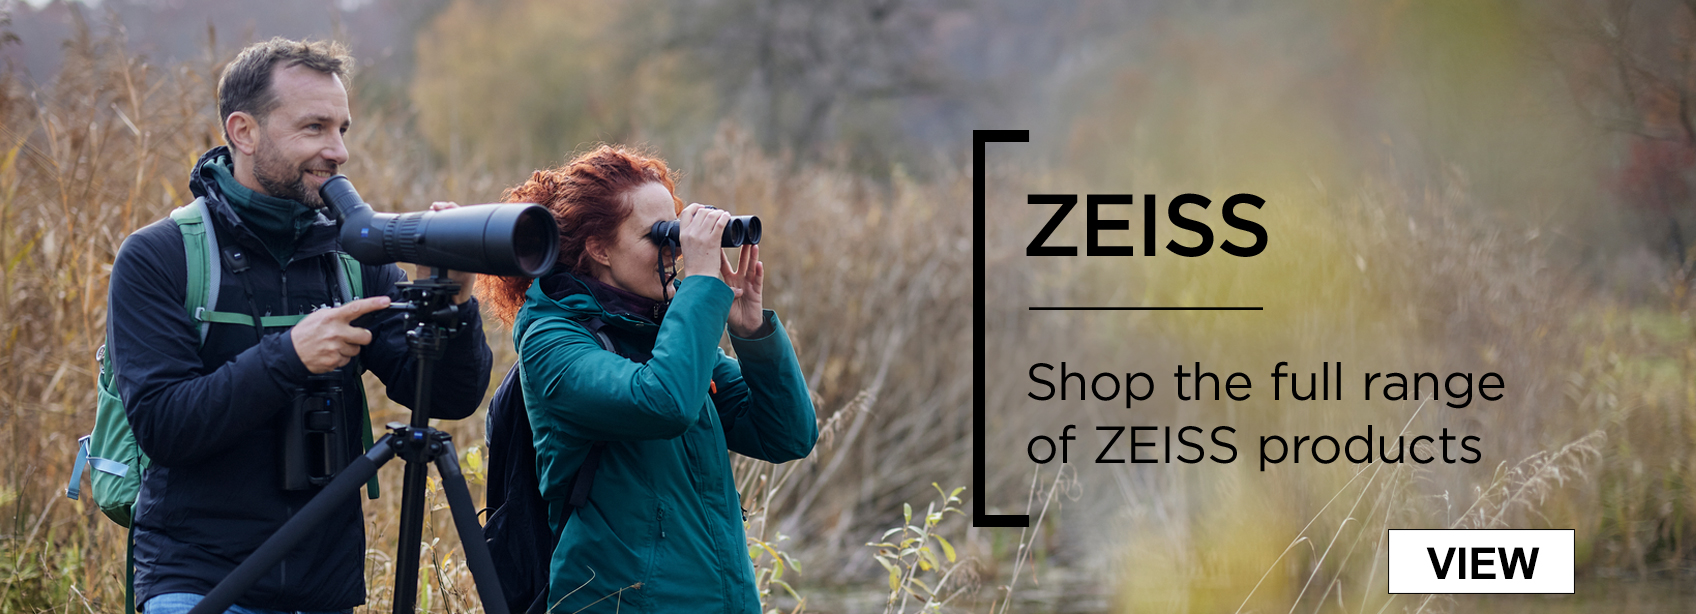 ZEISS - Shop the full range of ZEISS products